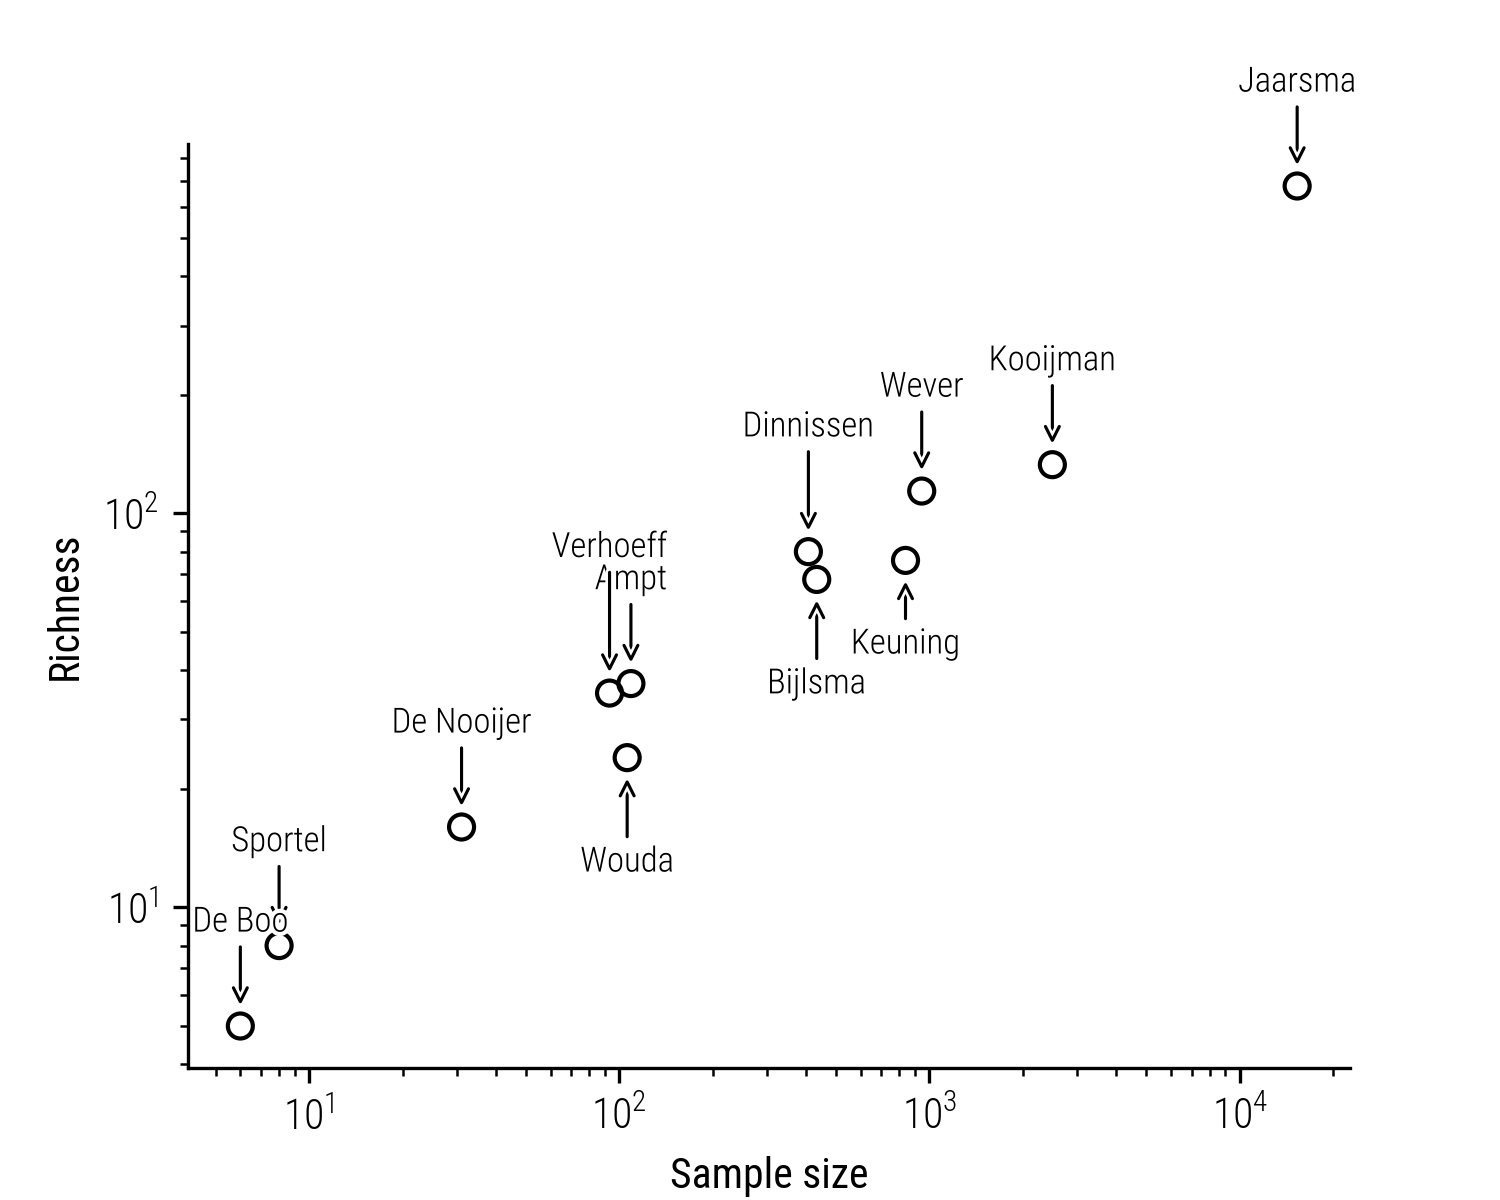 Figure 2: Relation between the sample size (measure in number of stories) and unique story types.